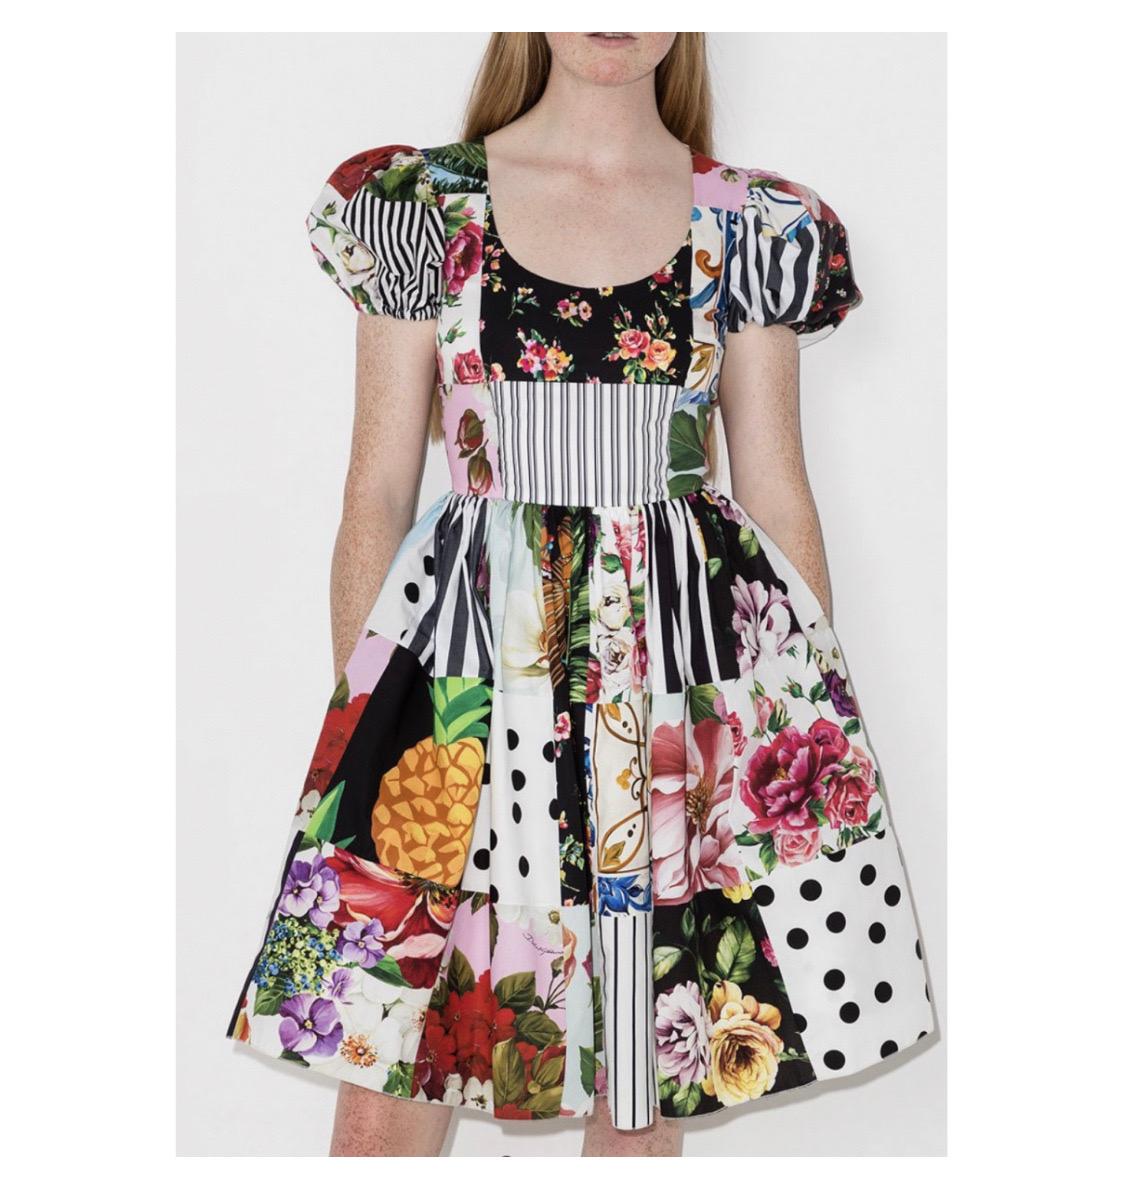 Dolce & Gabbana Patchwork
collection cotton mid length dress
Size 42IT, UK10, M.

100% cotton

Brand new with tags
Made in Italy

Please check my other DG clothing &

accessories! 
